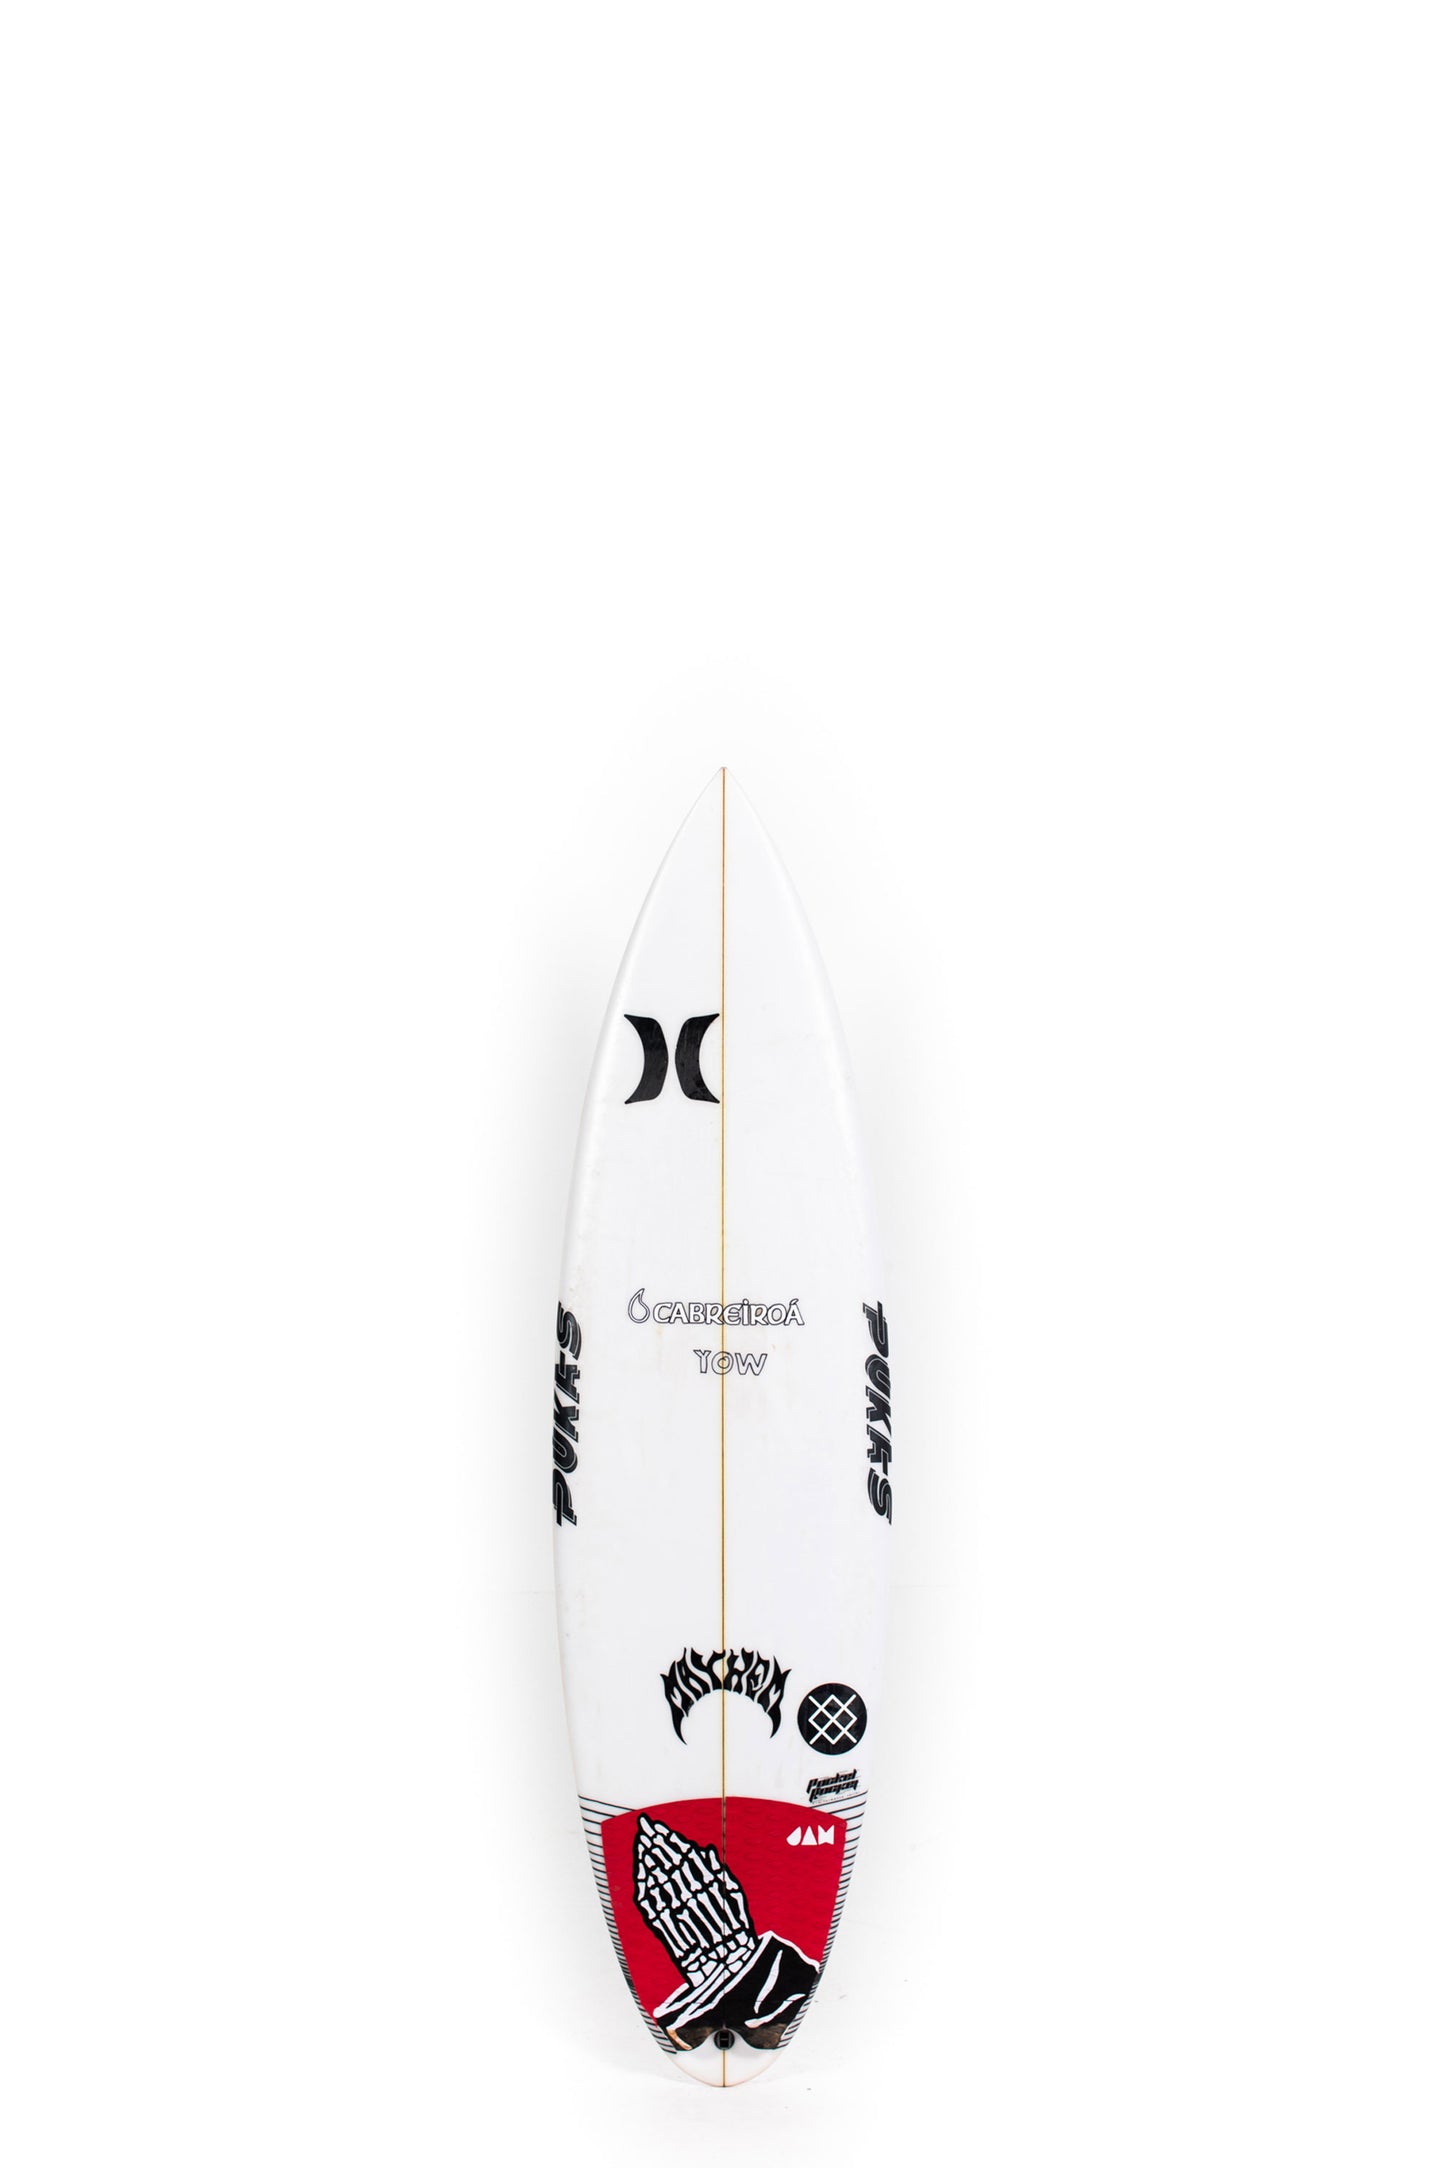 LOST SURFBOARDS  Available online at PUKAS SURF SHOP